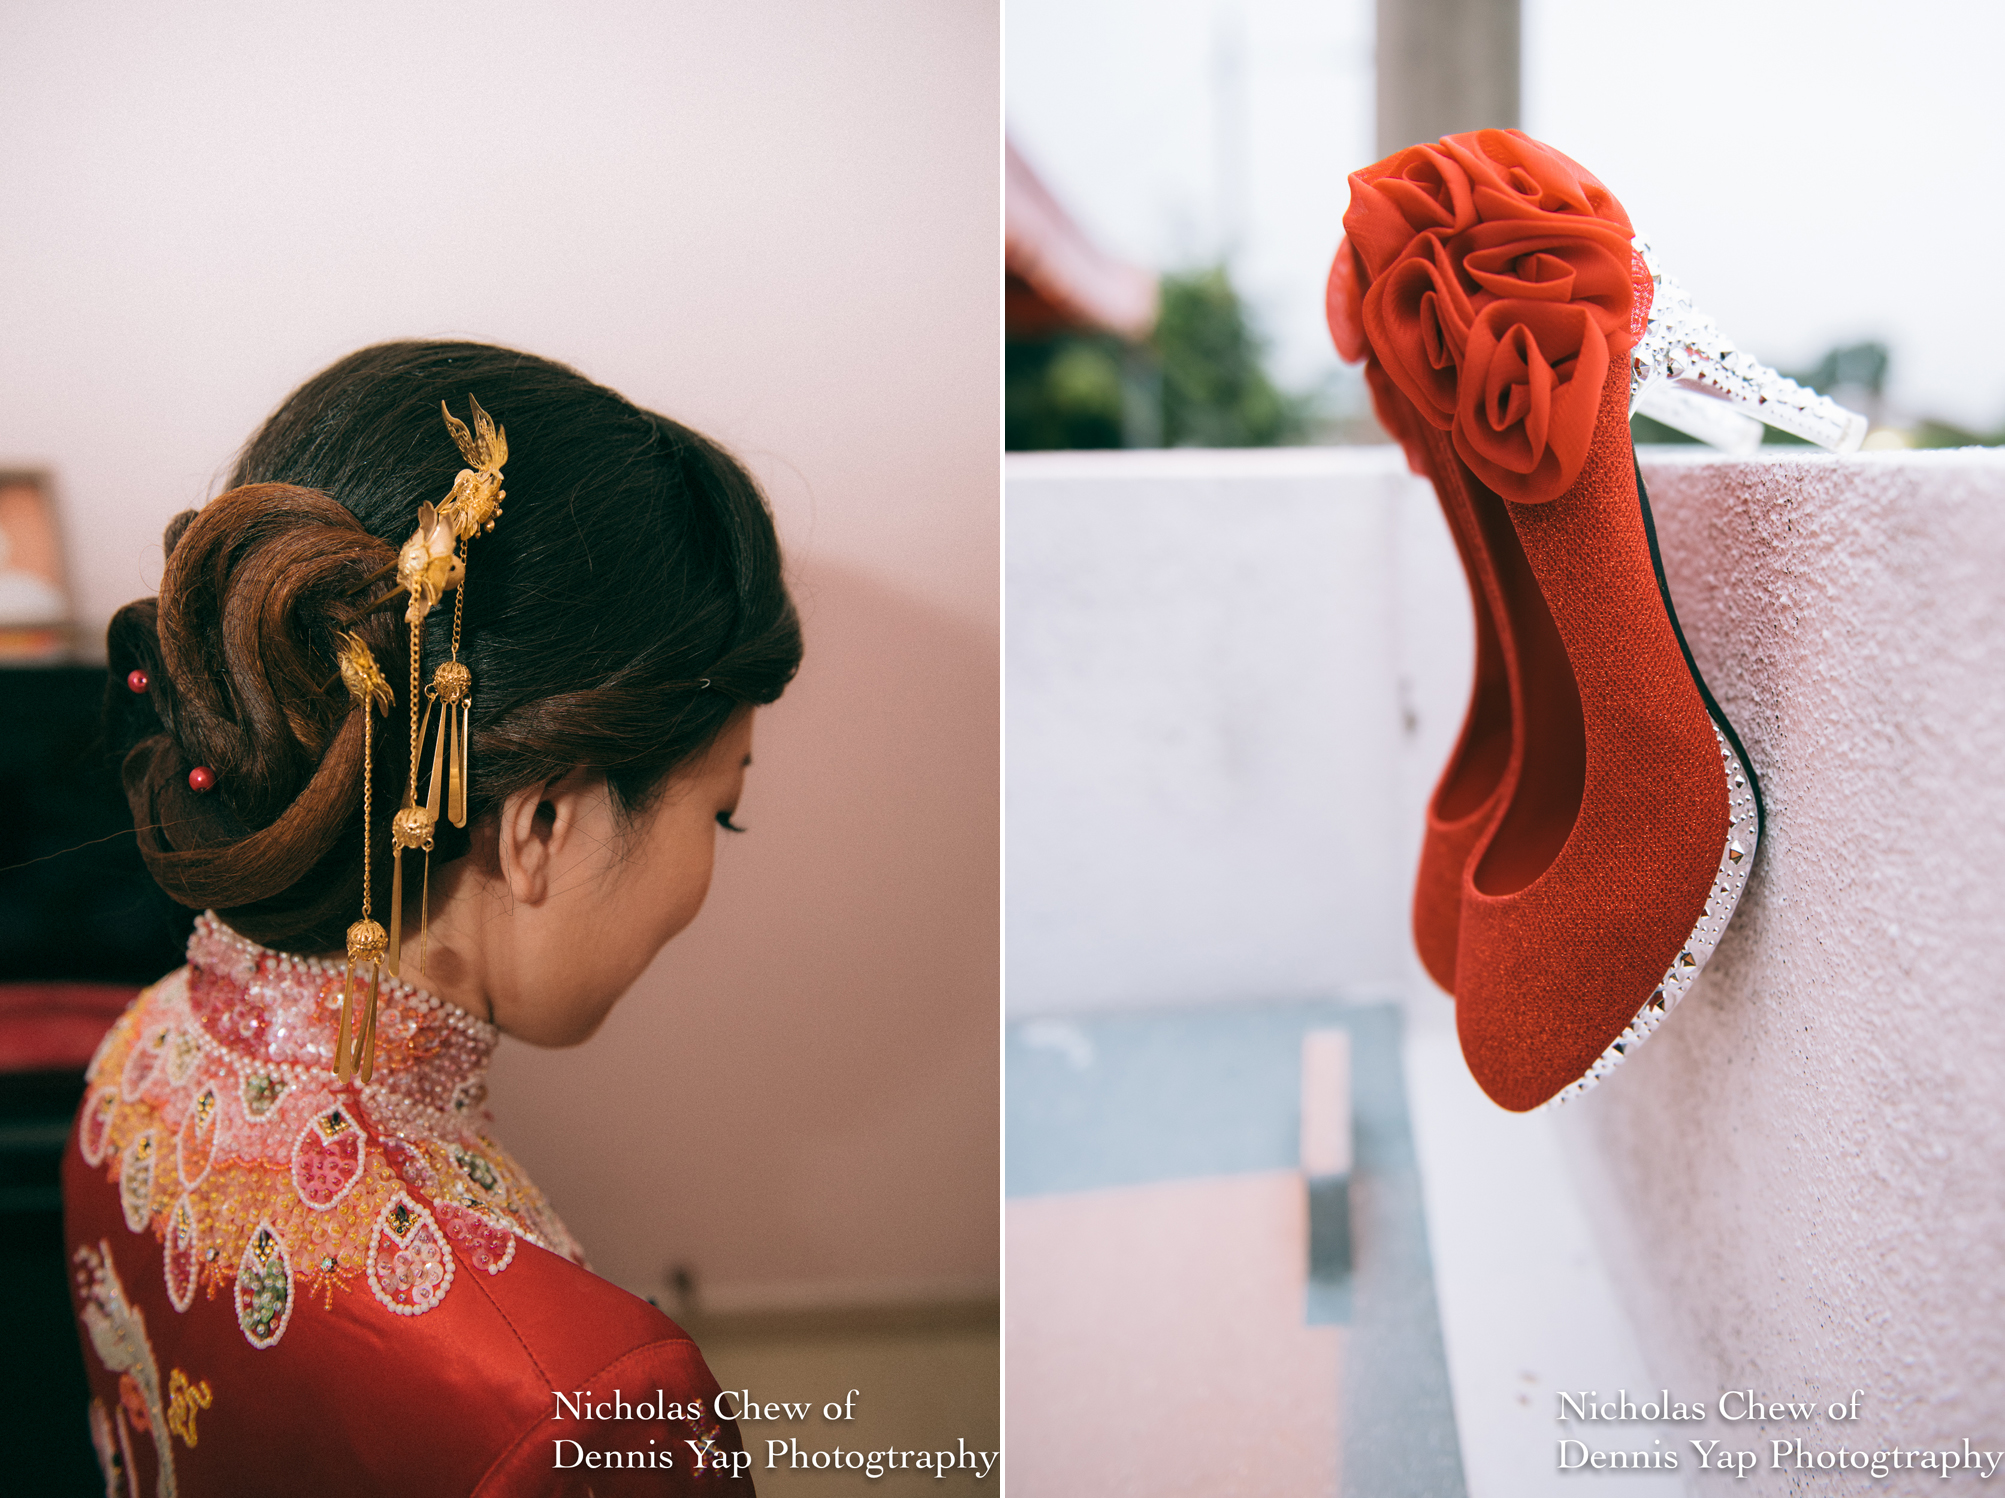 Nicholas Chew profile wedding natural candid moments chinese traditional church garden of dennis yap photography002Nicholas Profile-10.jpg